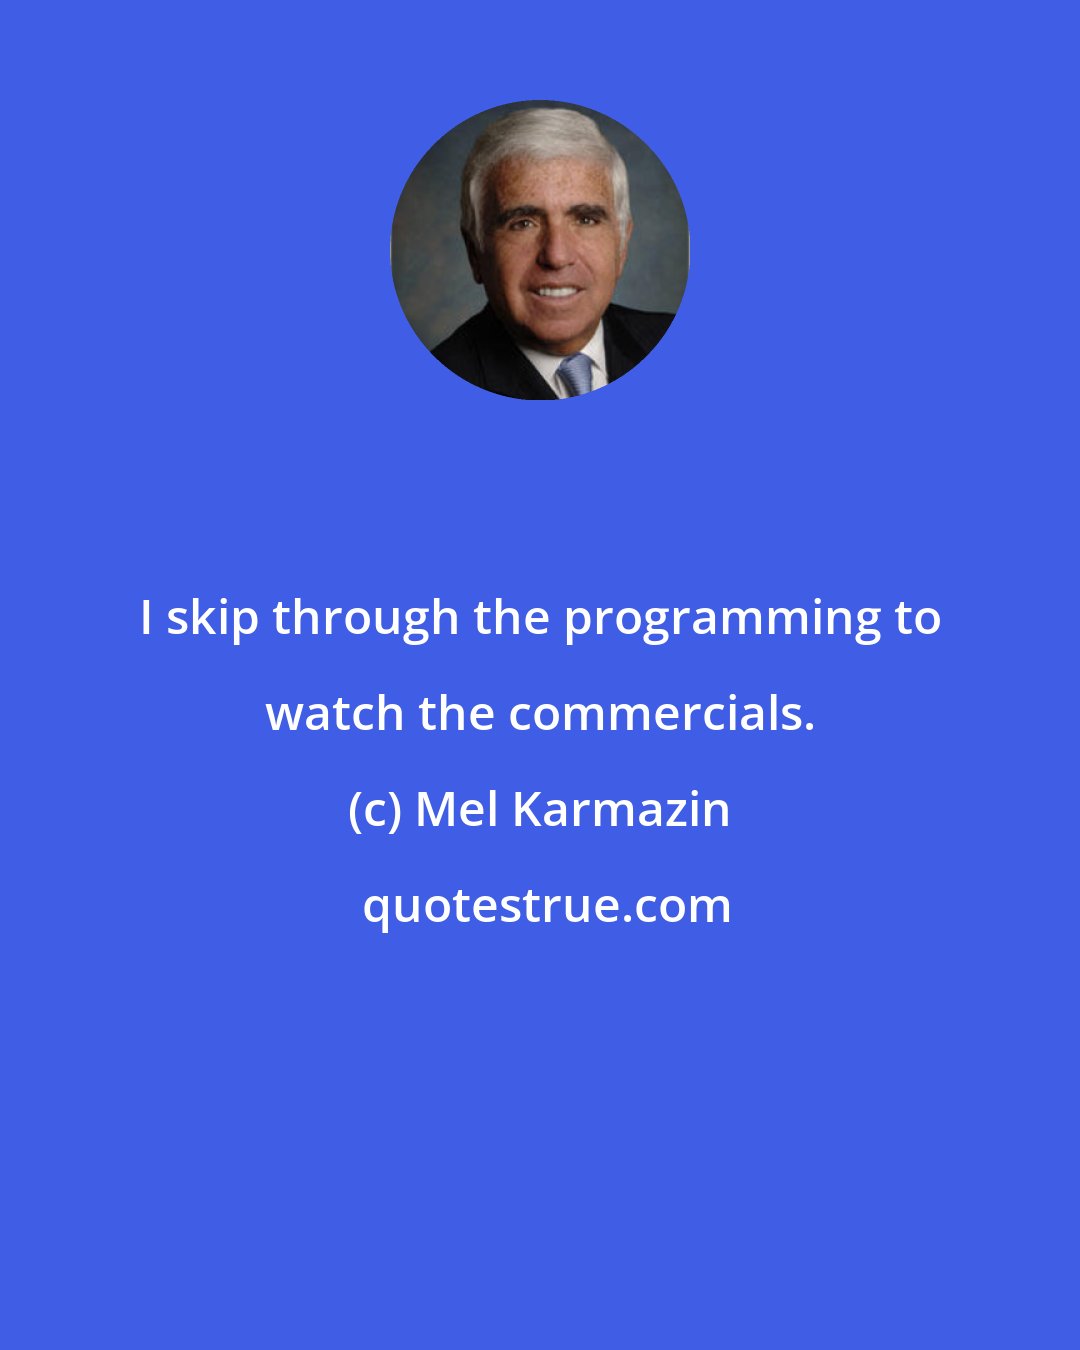 Mel Karmazin: I skip through the programming to watch the commercials.